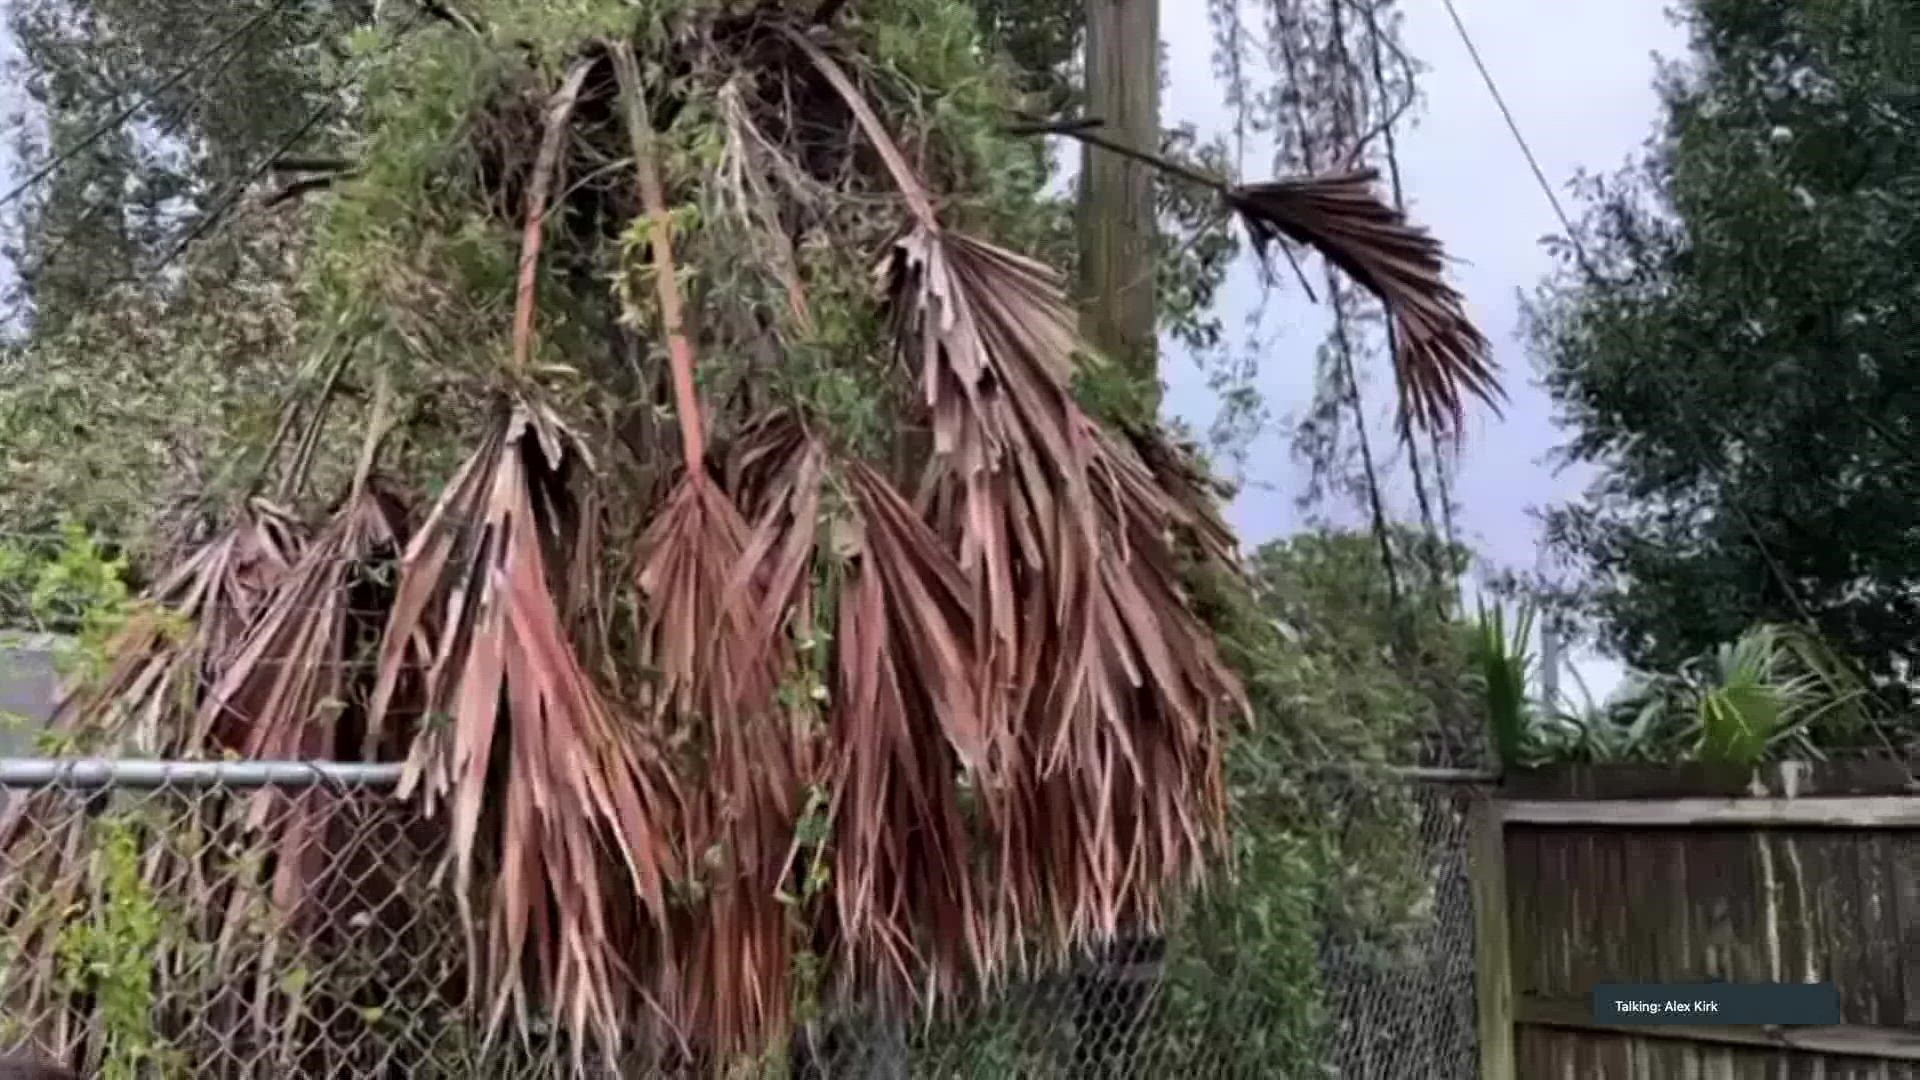 Meteorologist Chris Bianchi takes a look at some of the damage left behind from Hurricane Ian in Tampa Bay, where over a million people are still without power.